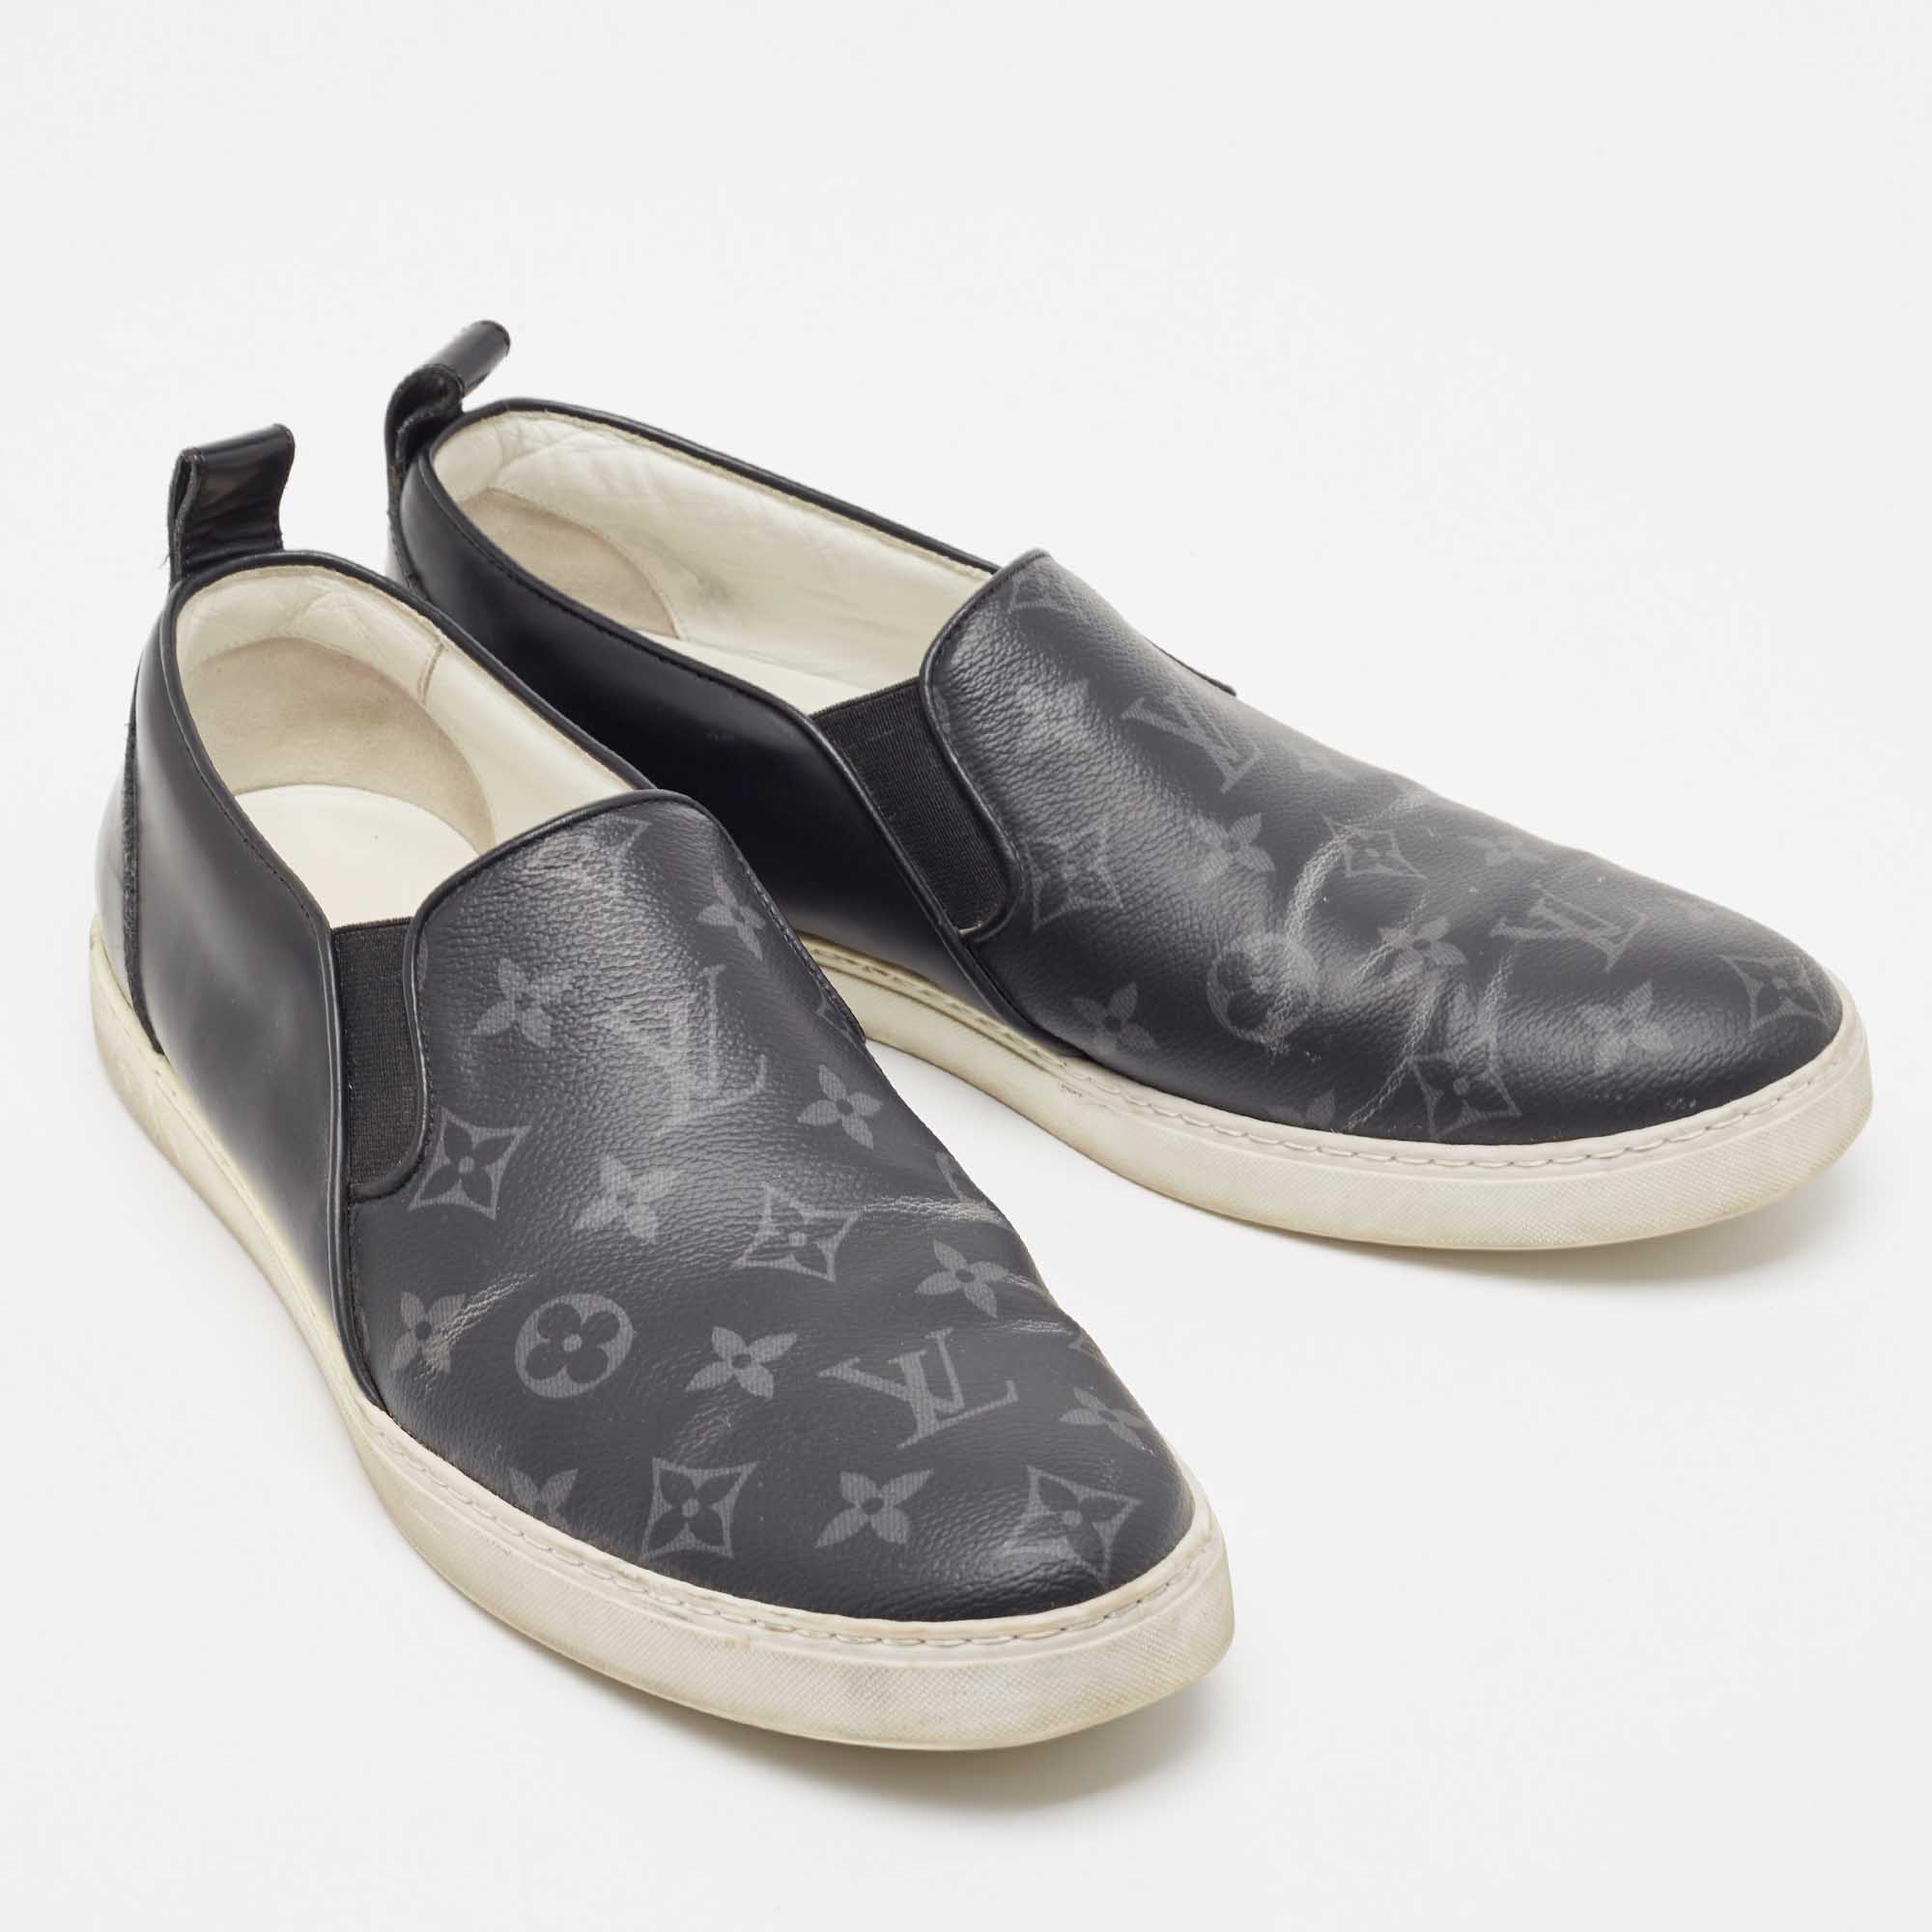 Louis Vuitton Black/Grey Monogram Canvas And Leather Slip On Sneakers Size 42.5